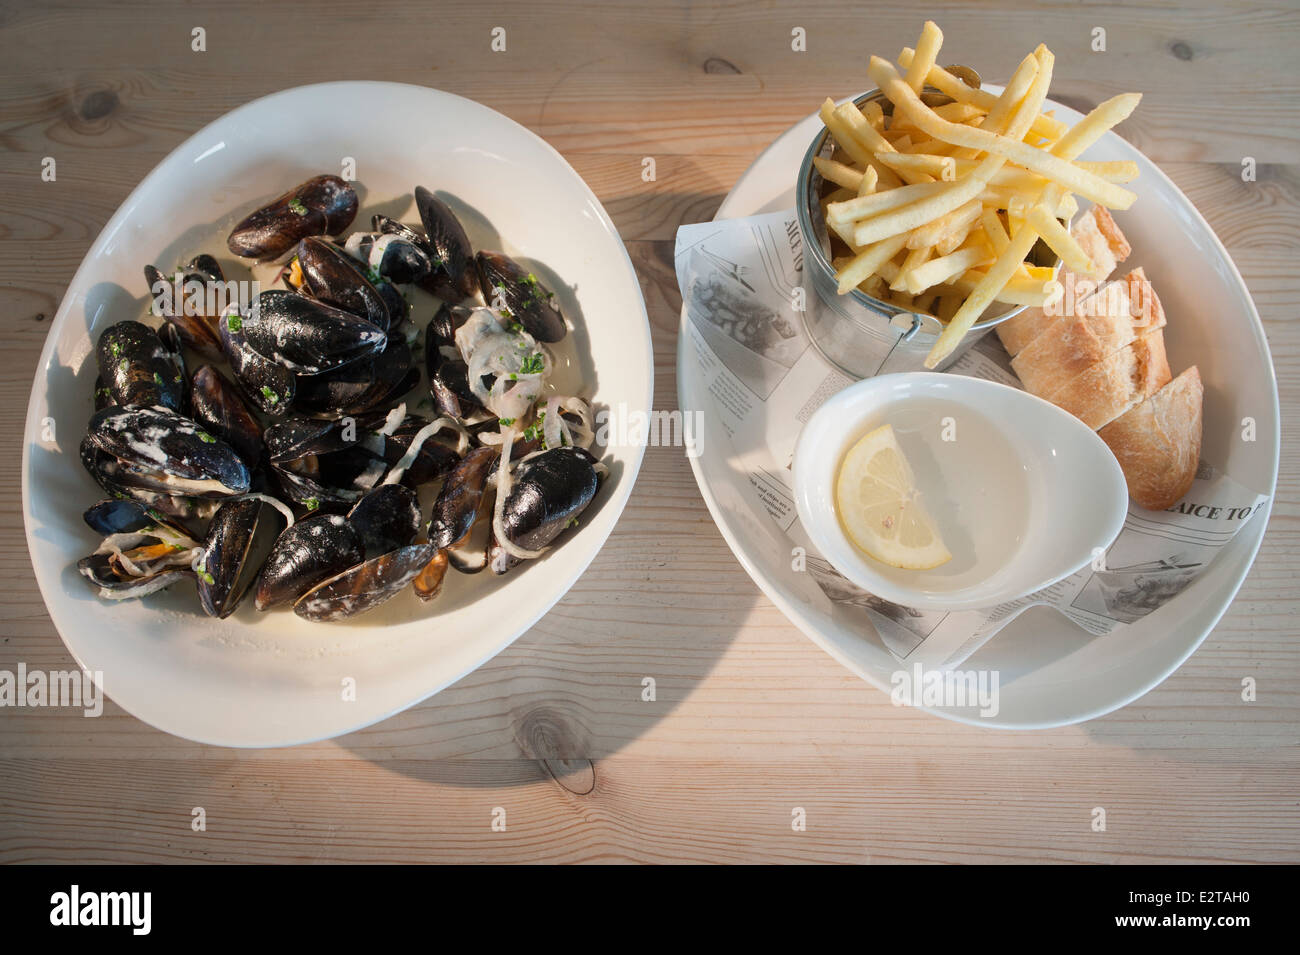 Mussels or Moules cooked in in white wine with parsley and accompanied with chips or French fries and white bread. Stock Photo